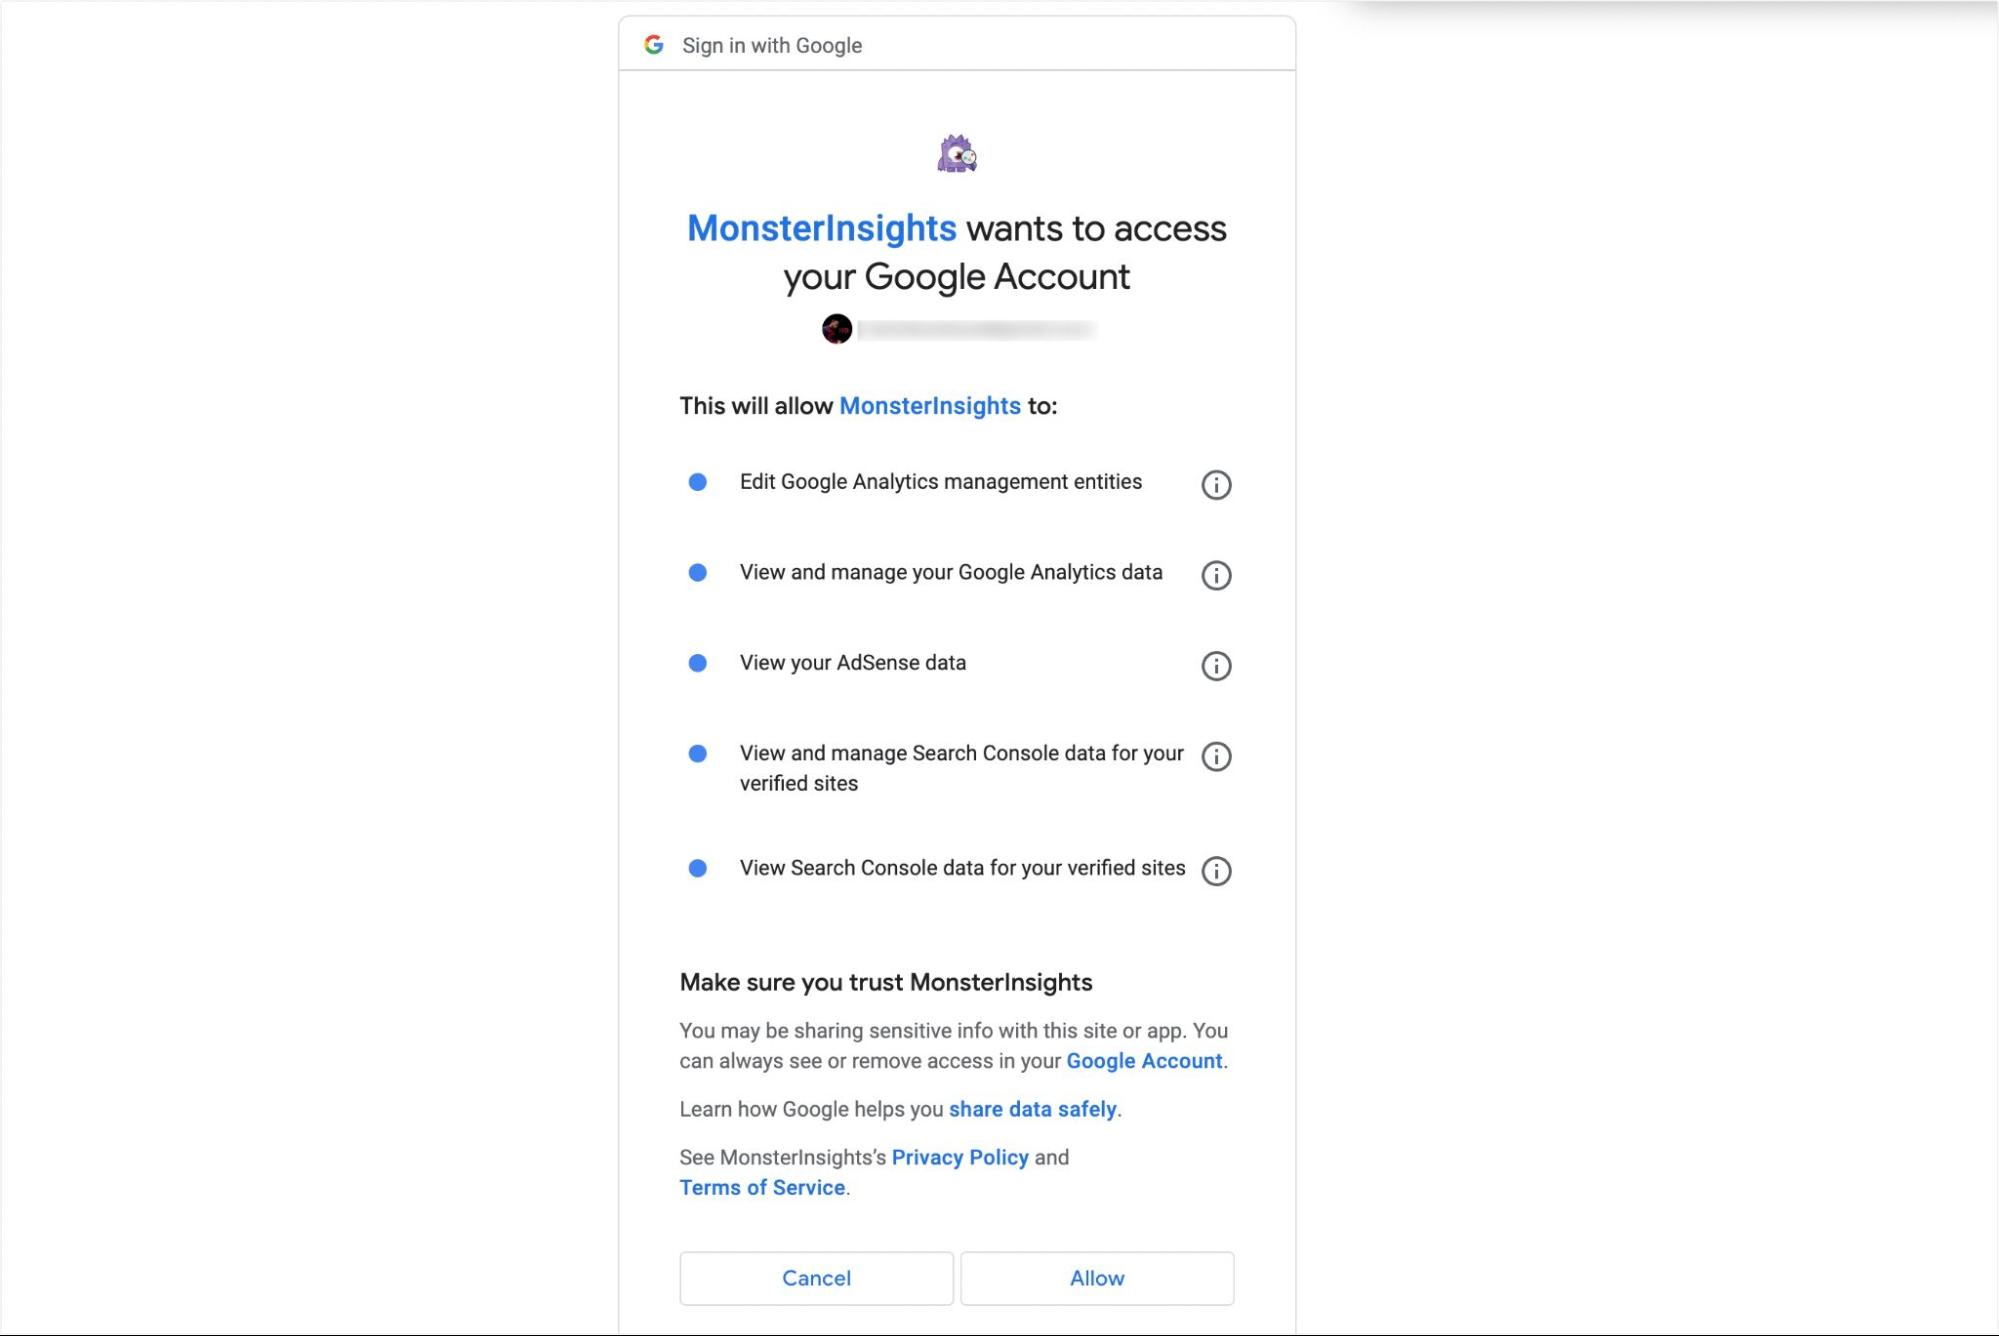 Grant MonsterInsights permission to access your Google account